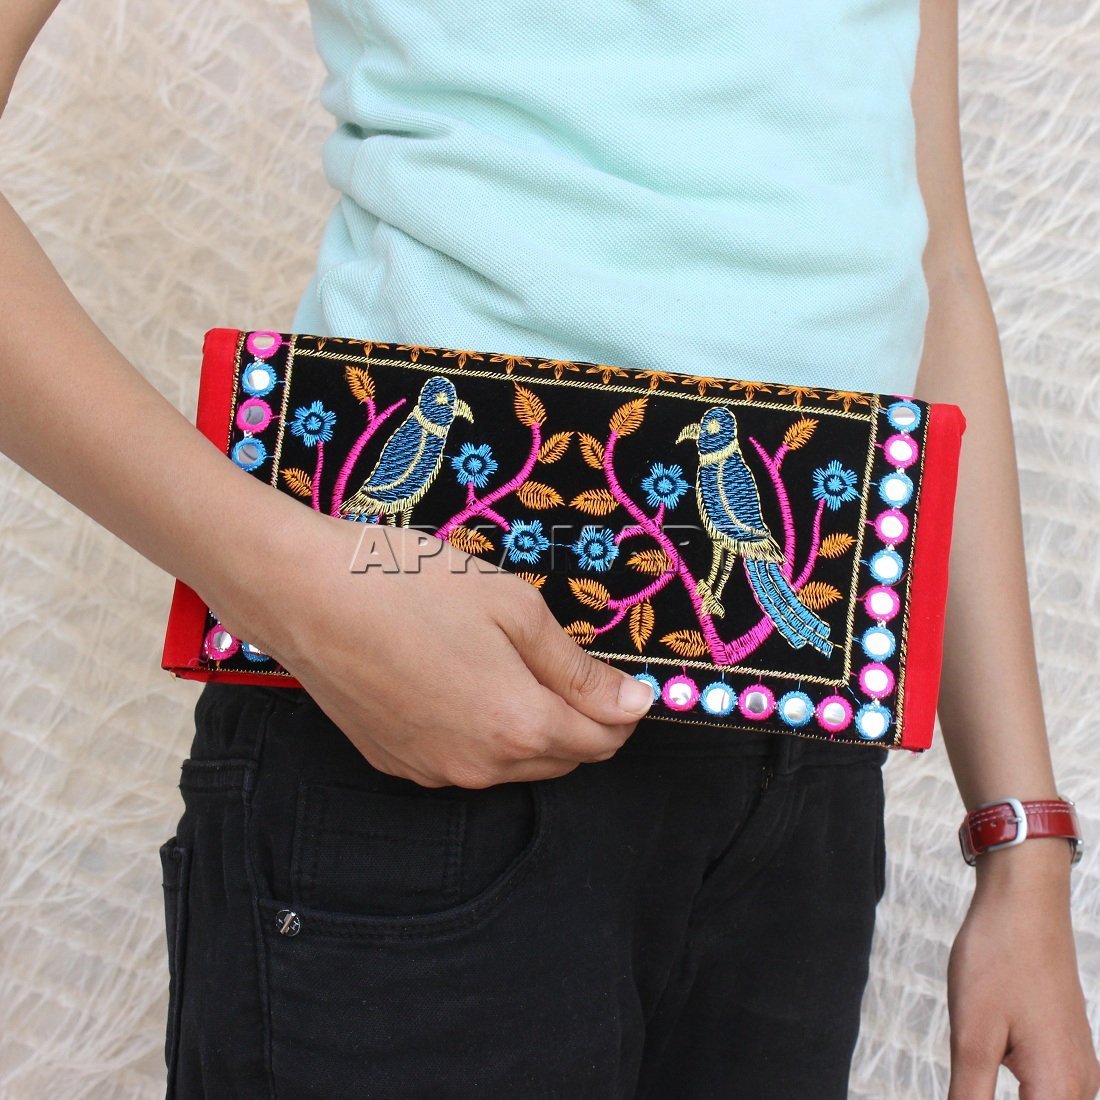 Ladies wallet: Best Wallets and Clutches for Women - The Economic Times